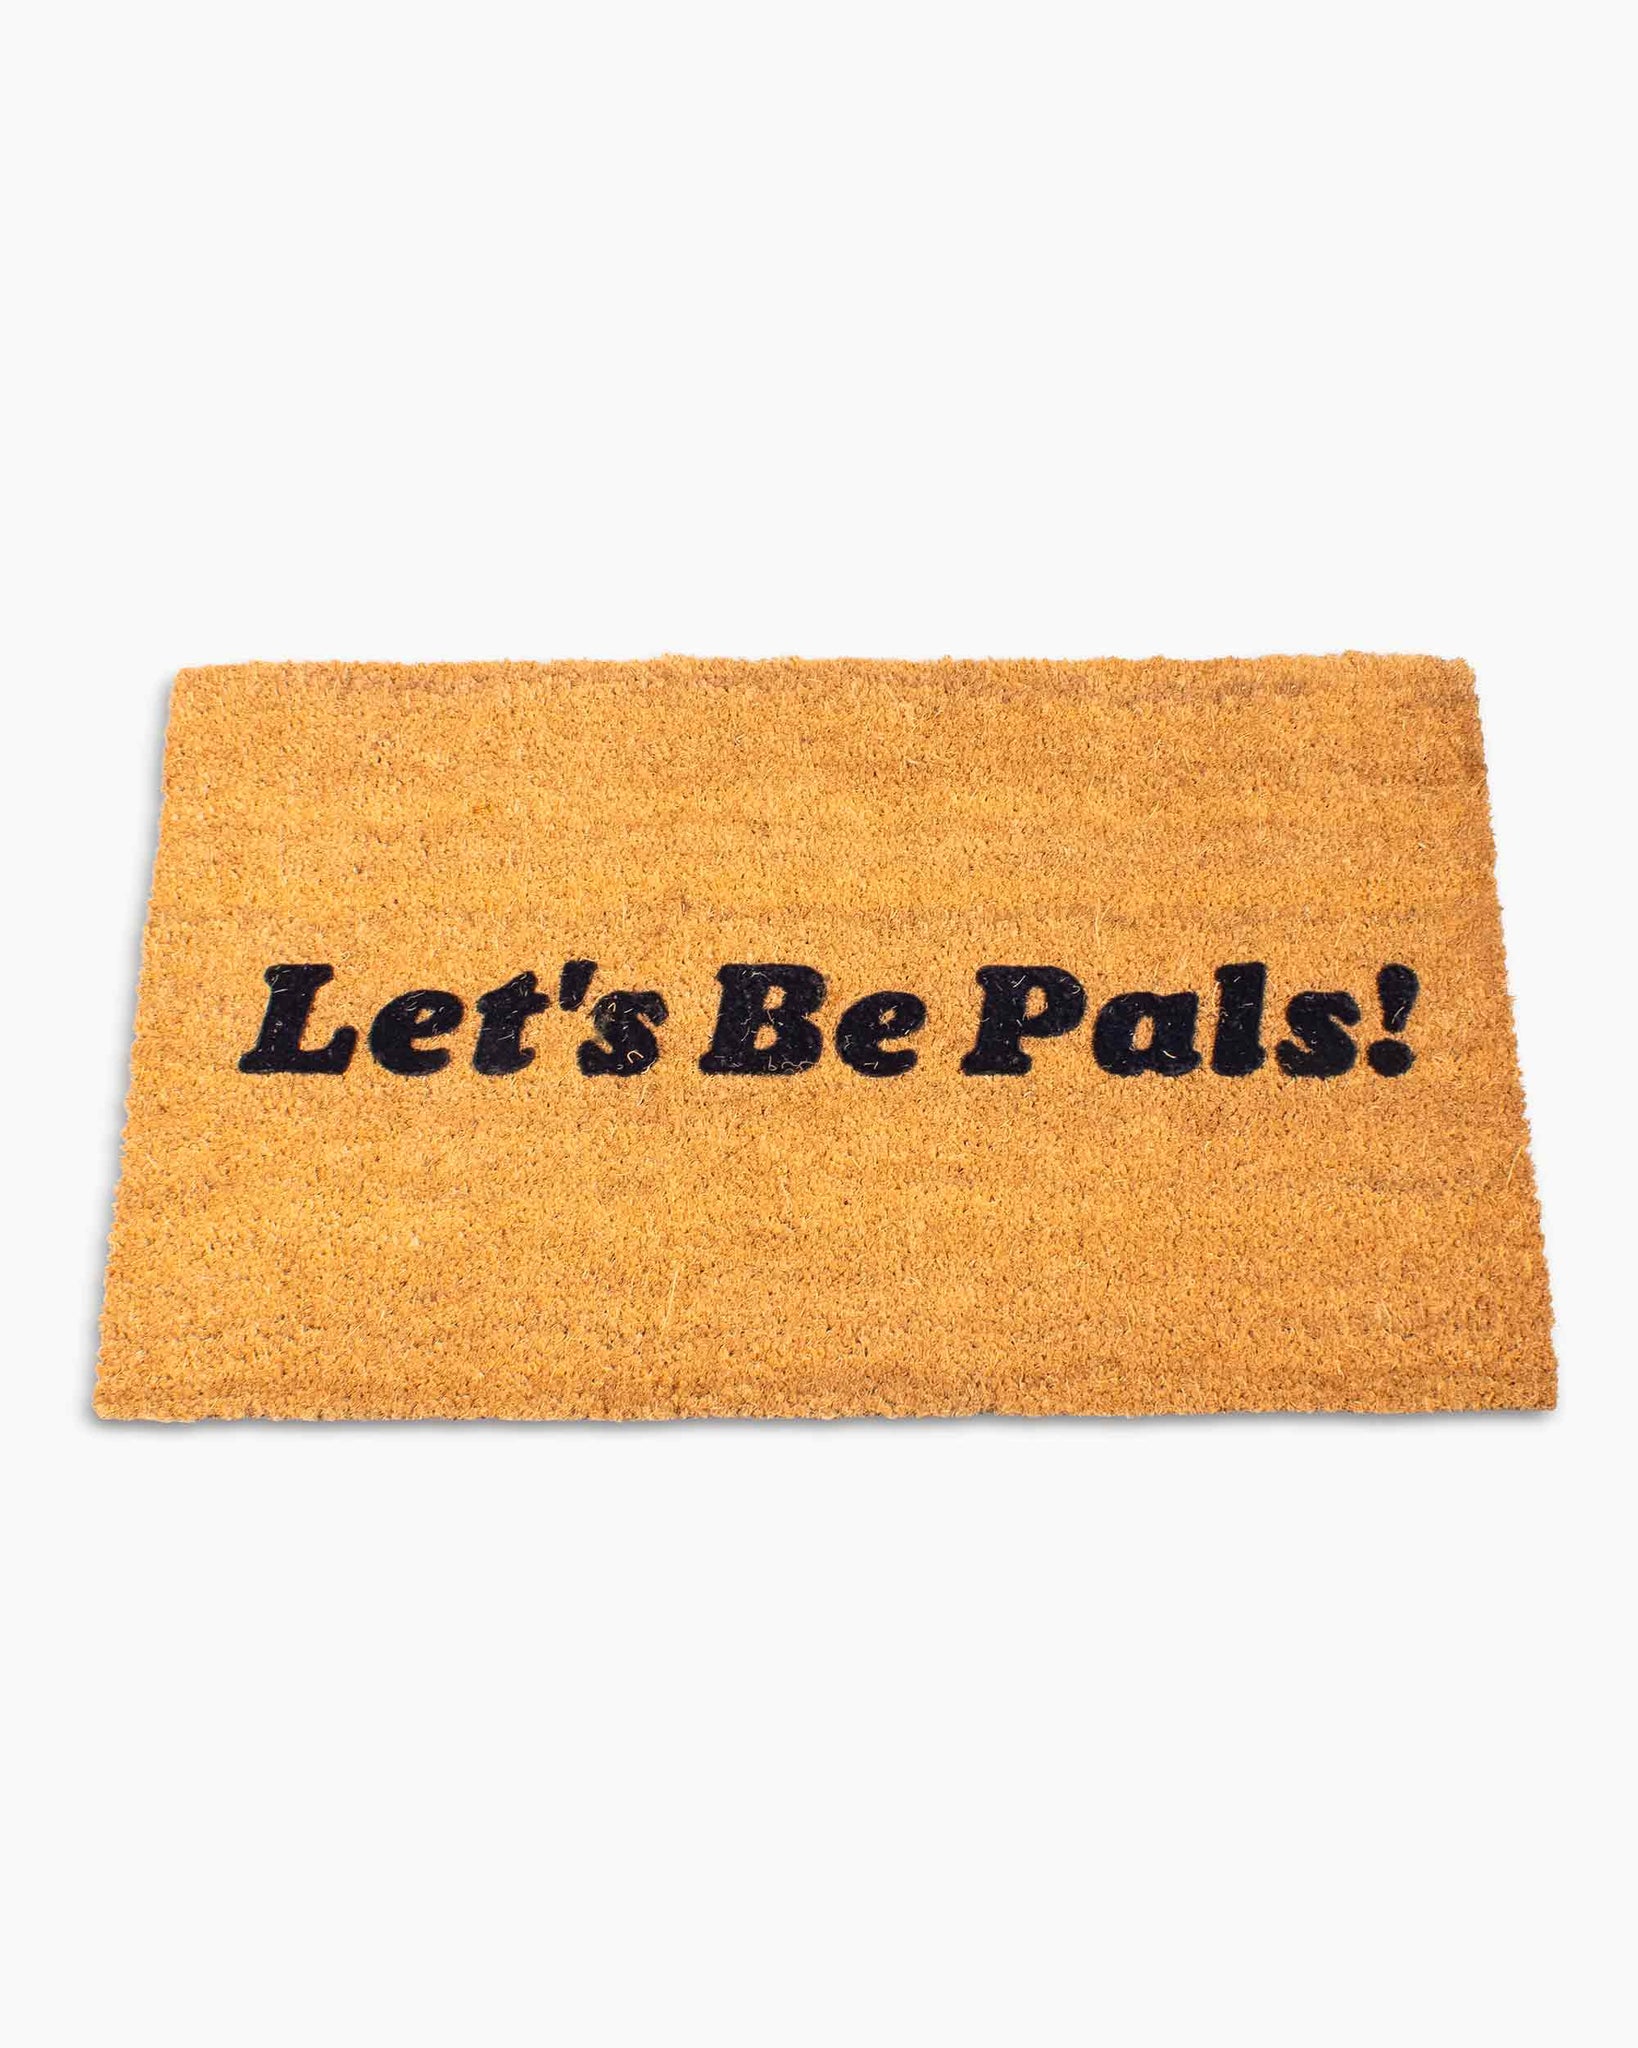 Lost & Found 'Let's Be Pals' Mat Main